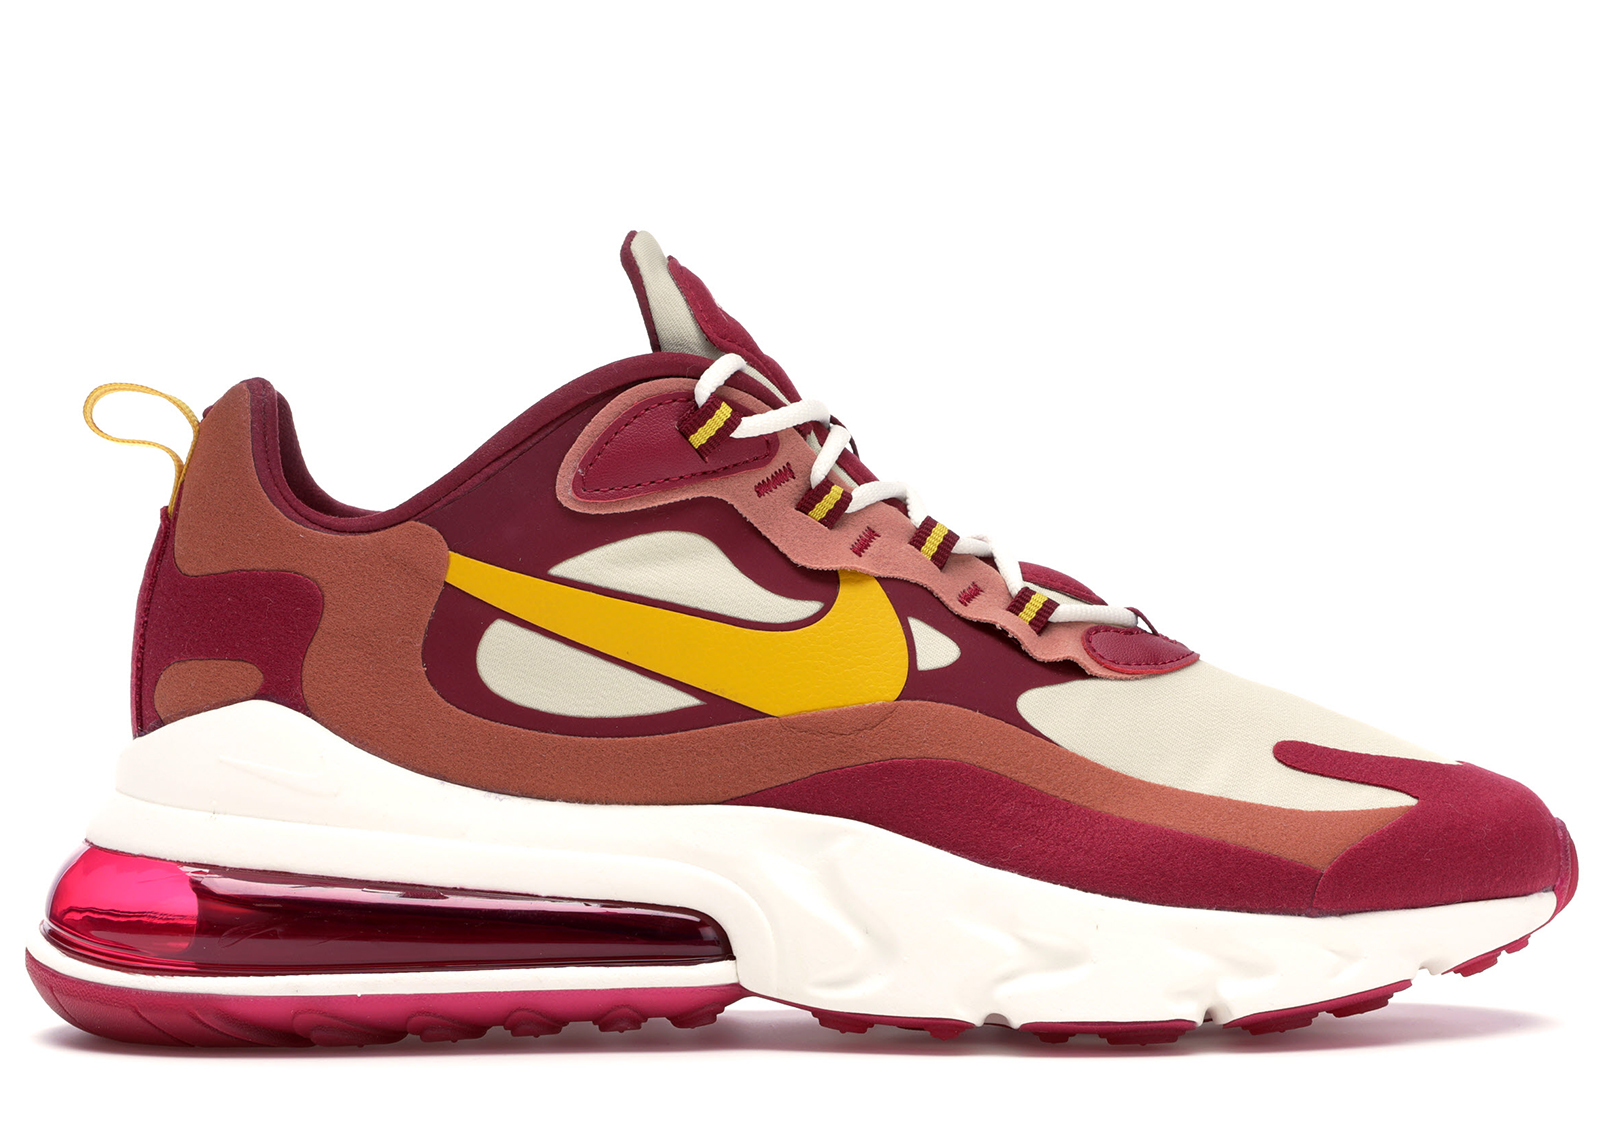 Nike Air Max 270 React Noble Red Team Gold Men's - AO4971-601 - US